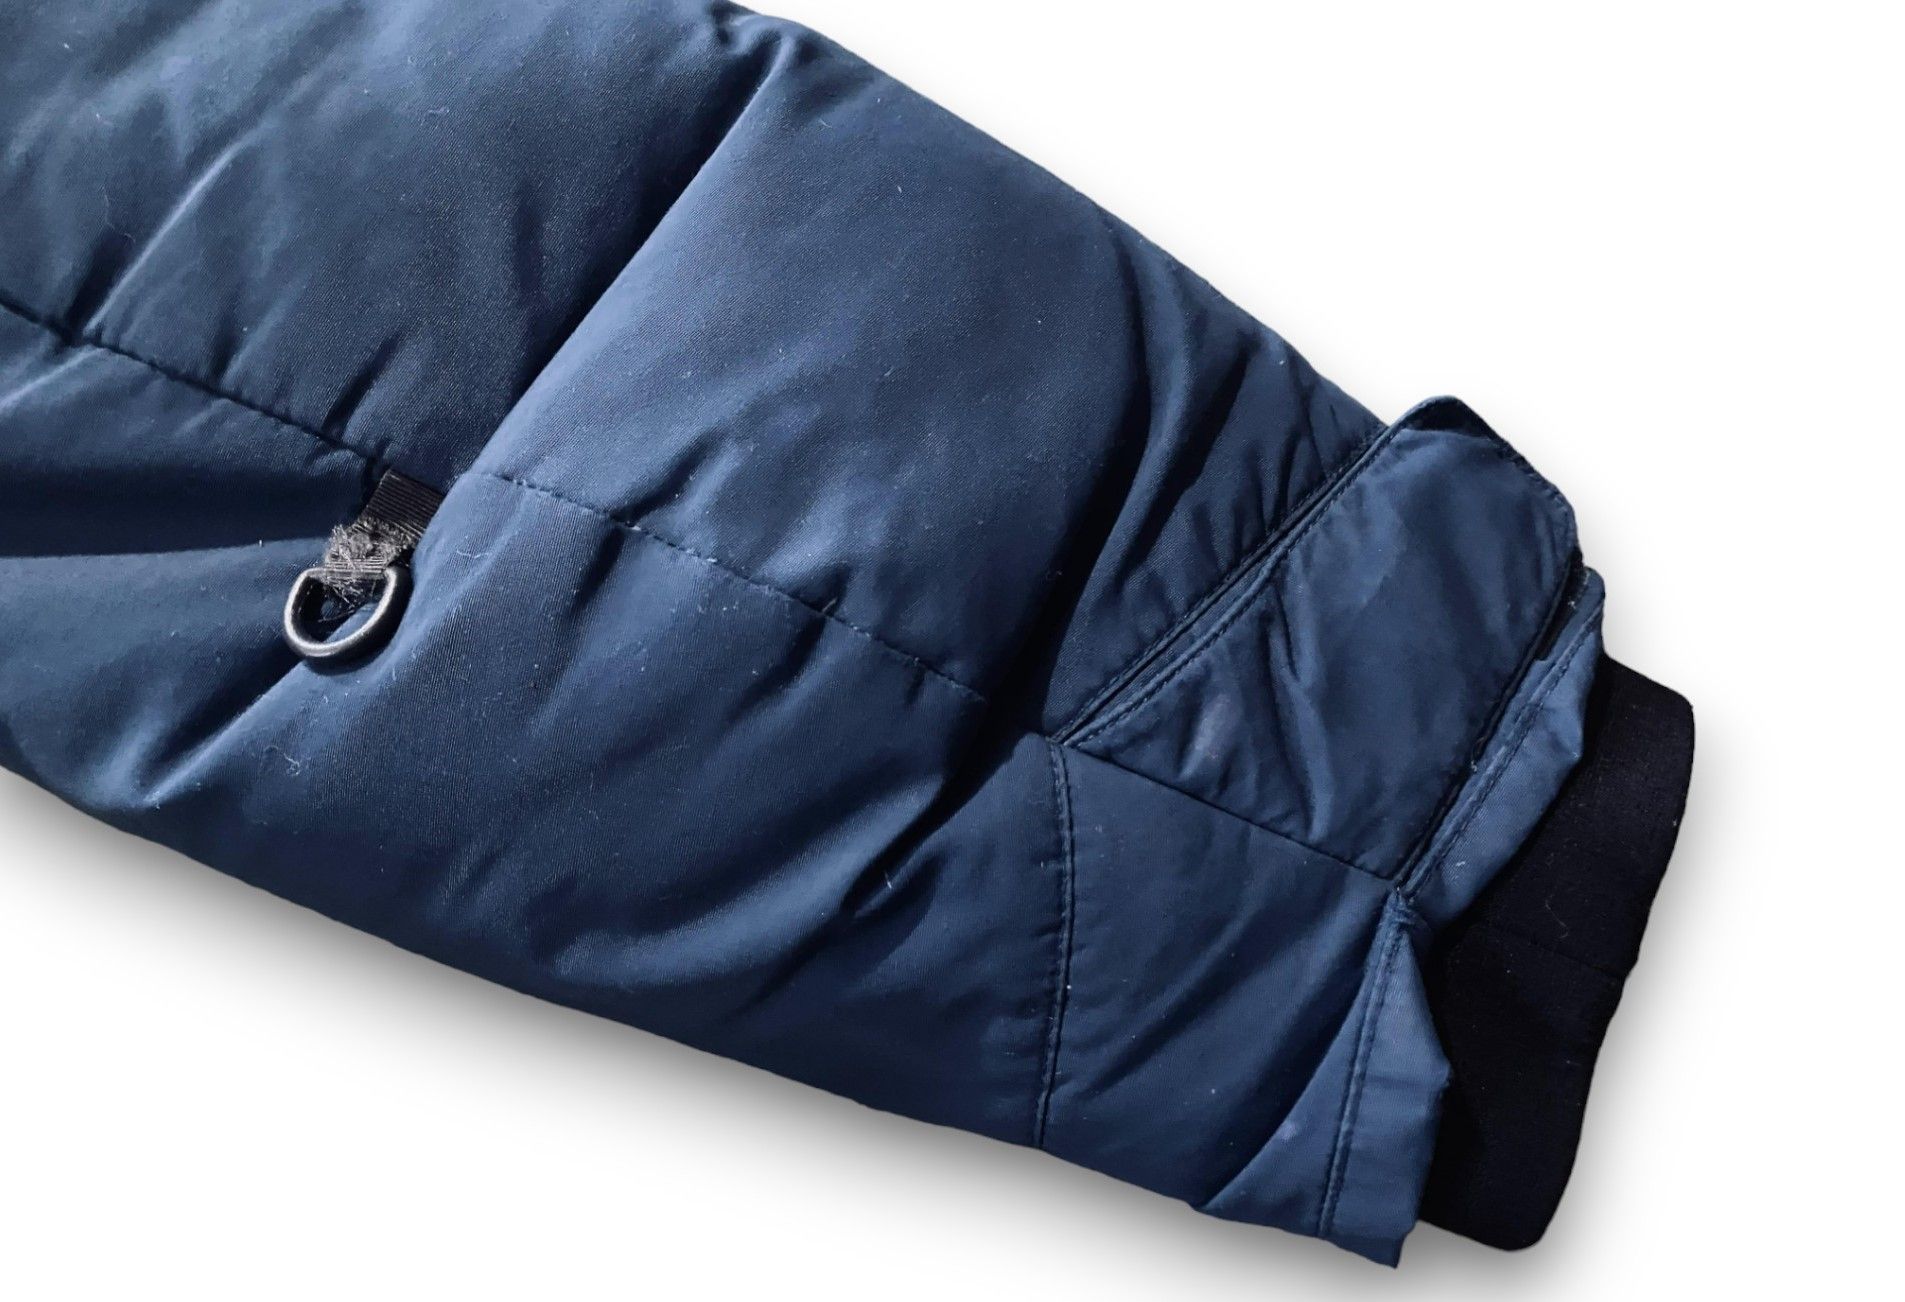 The North Face Puffer Jacket Summit Series 700 Navy - 8